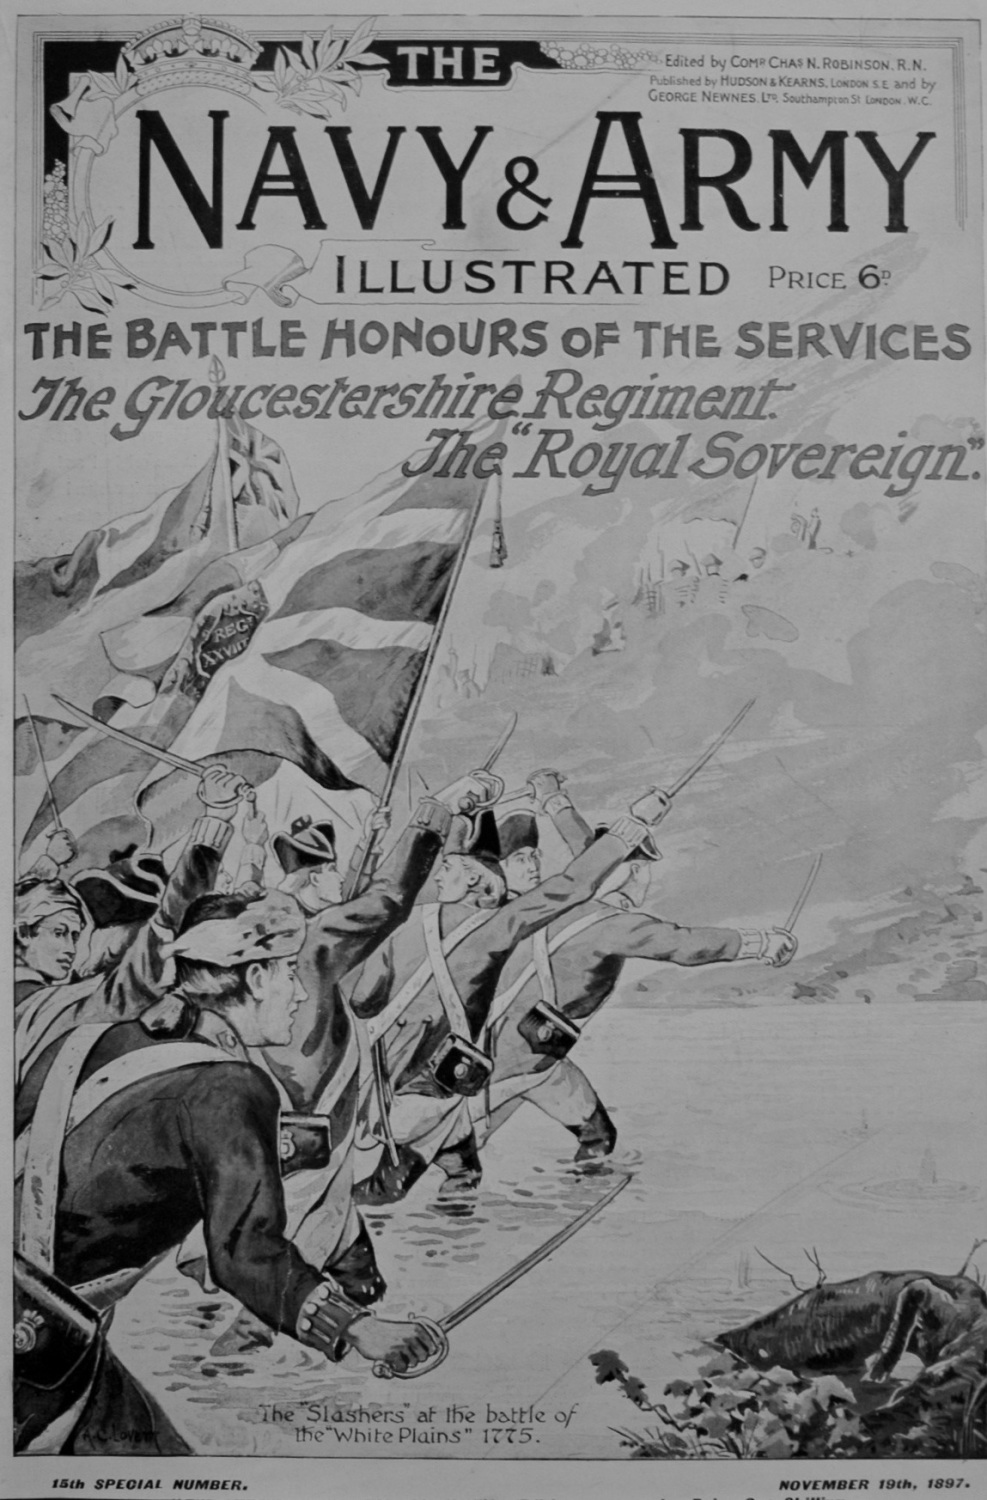 The Battle Honours of the Services - 1897